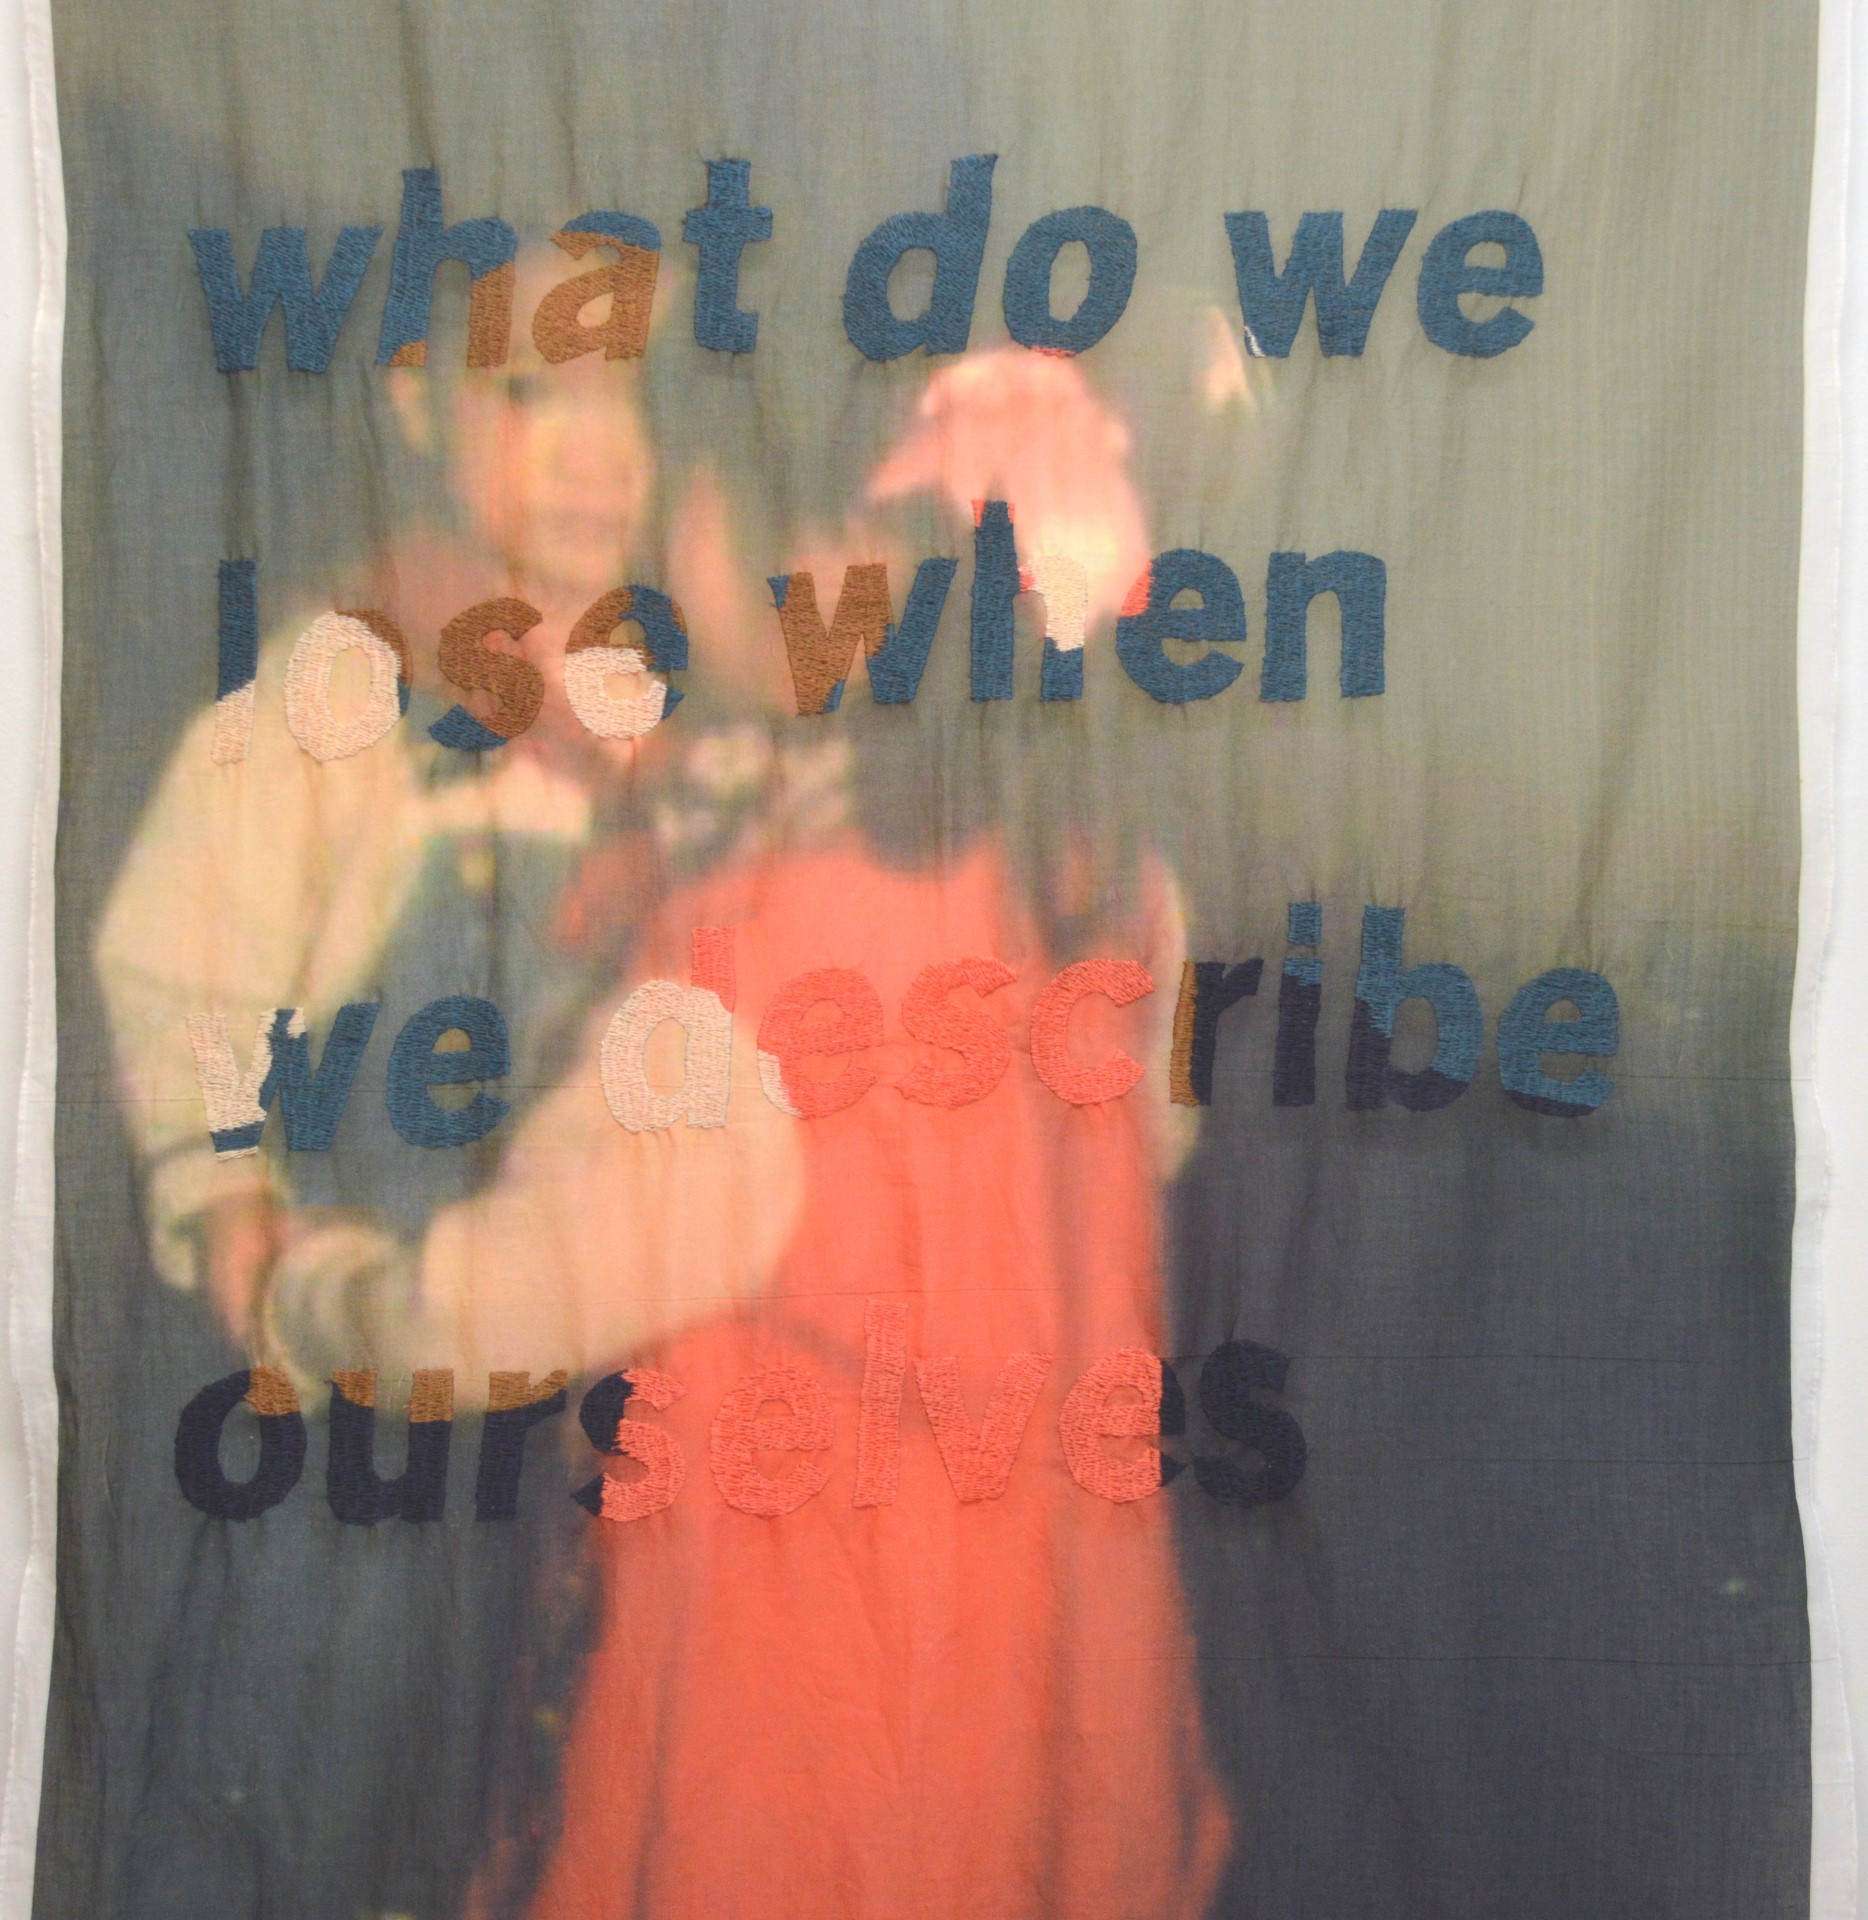 Textile print, family archive of two Asian infants dancing, with embroidered words "what do we do when we describe ourselves"